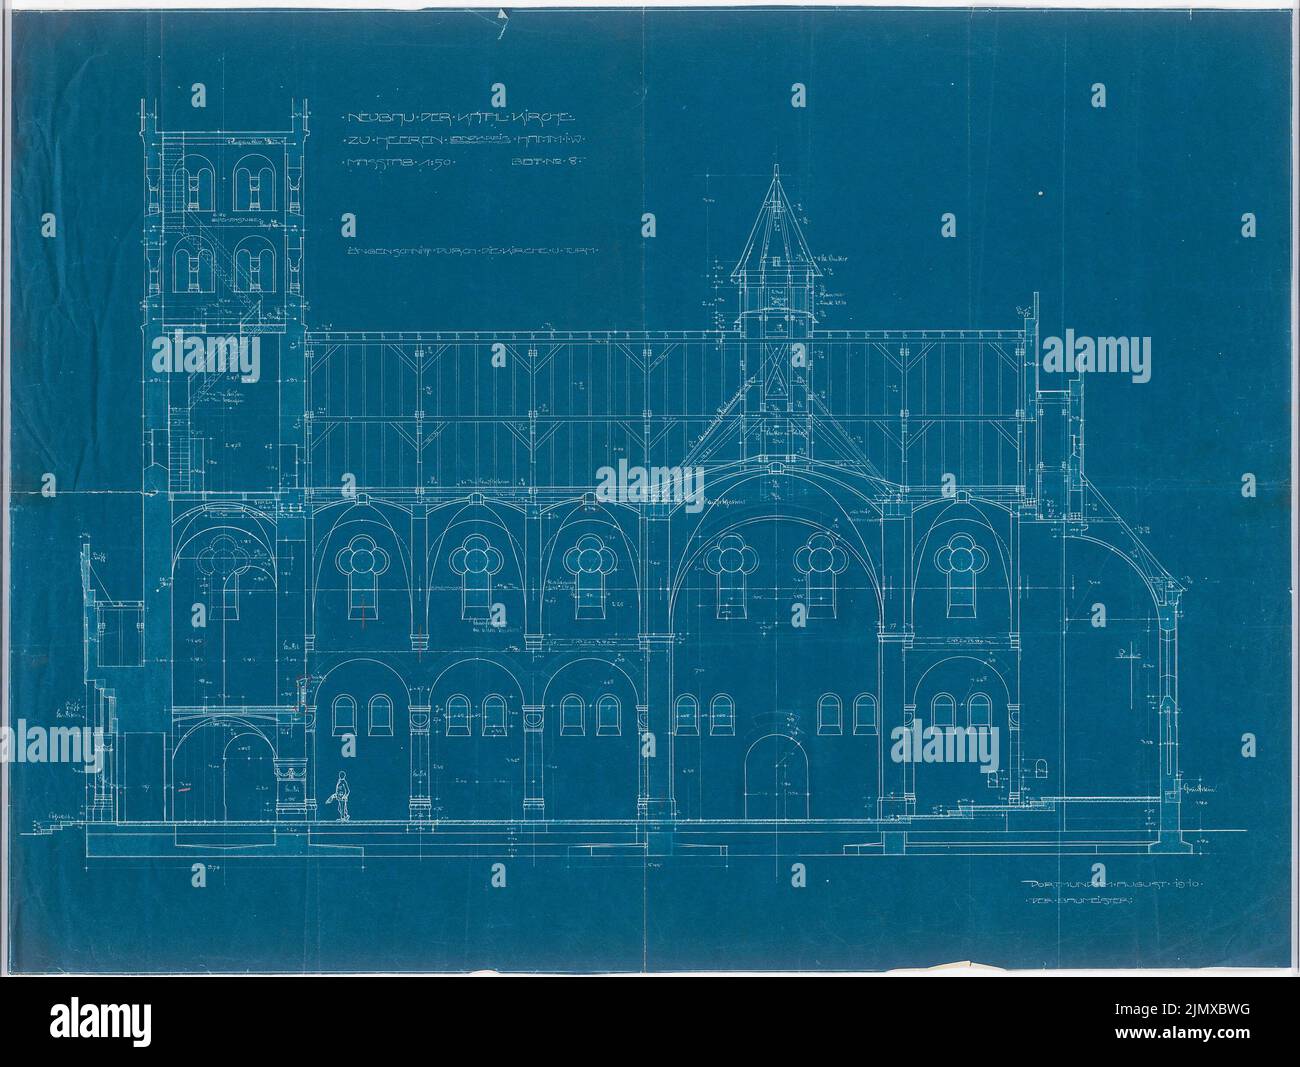 Klomp Johannes Franziskus (1865-1946), Herz Jesus Church (with vicarie), Heeren-Werve (08.1910): Longitudinal section of the church 1:50. Colored pencil over blueprint on paper, 67.7 x 90.1 cm (including scan edges) Klomp Johannes Franziskus  (1865-1946): Herz-Jesu-Kirche (mit Vikarie), Heeren-Werve Stock Photo